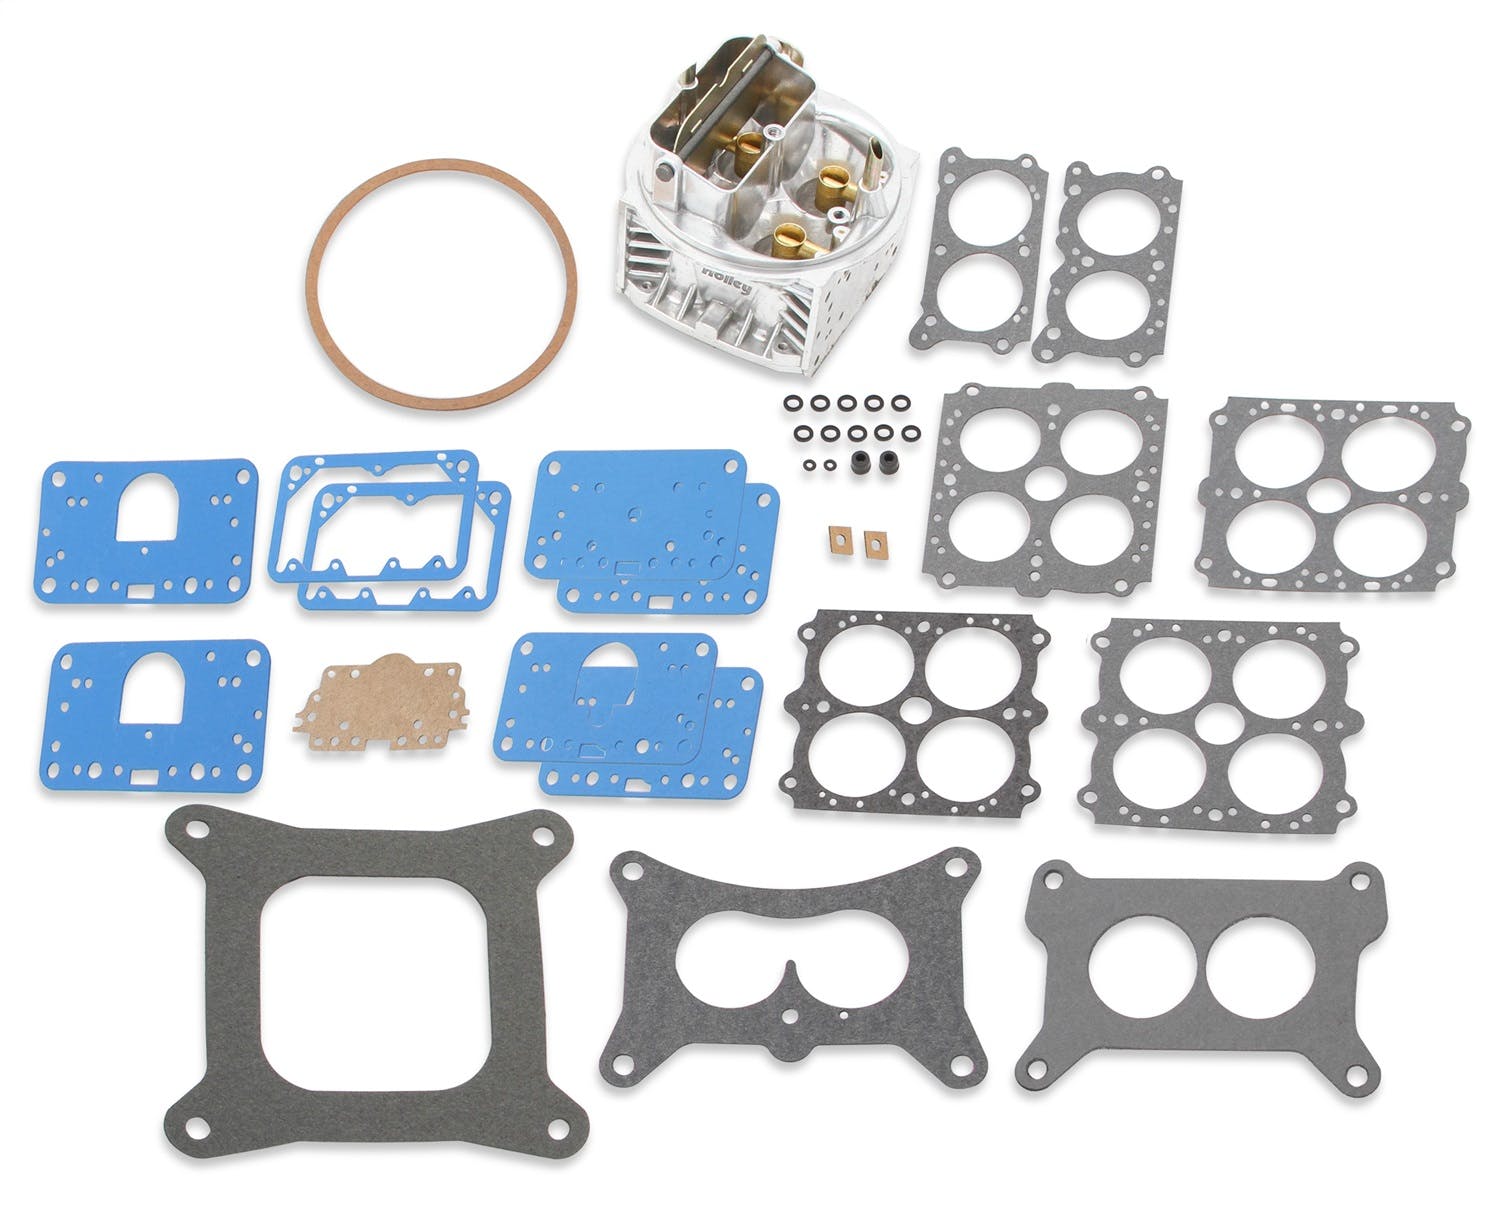 Holley 134-352 REPLACEMENT MAIN BODY KIT FOR 0-83670